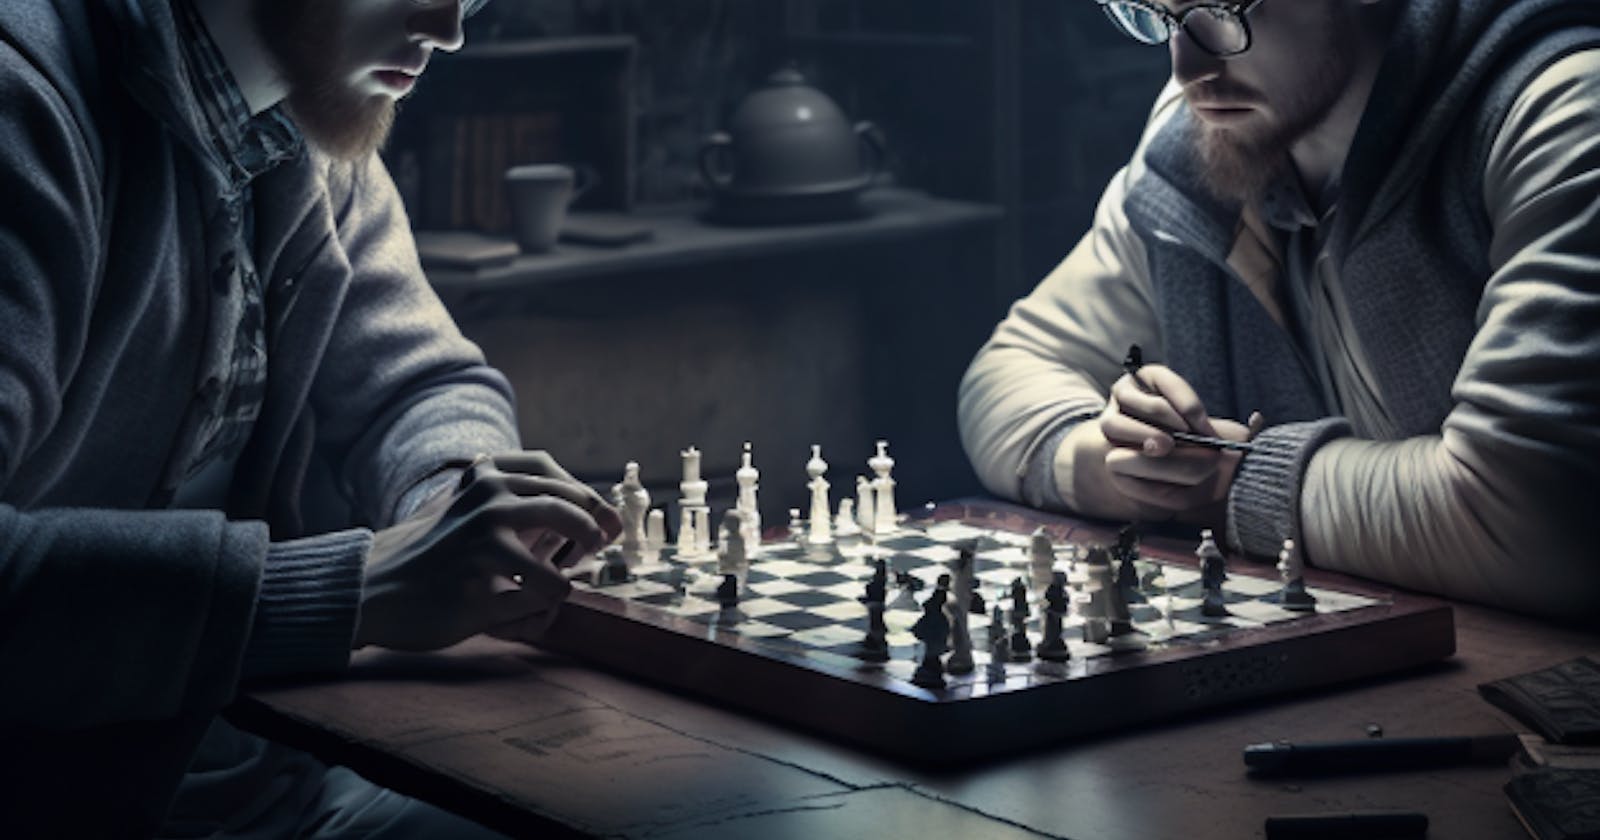 Checkmate Your Code: Lessons from the Chessboard